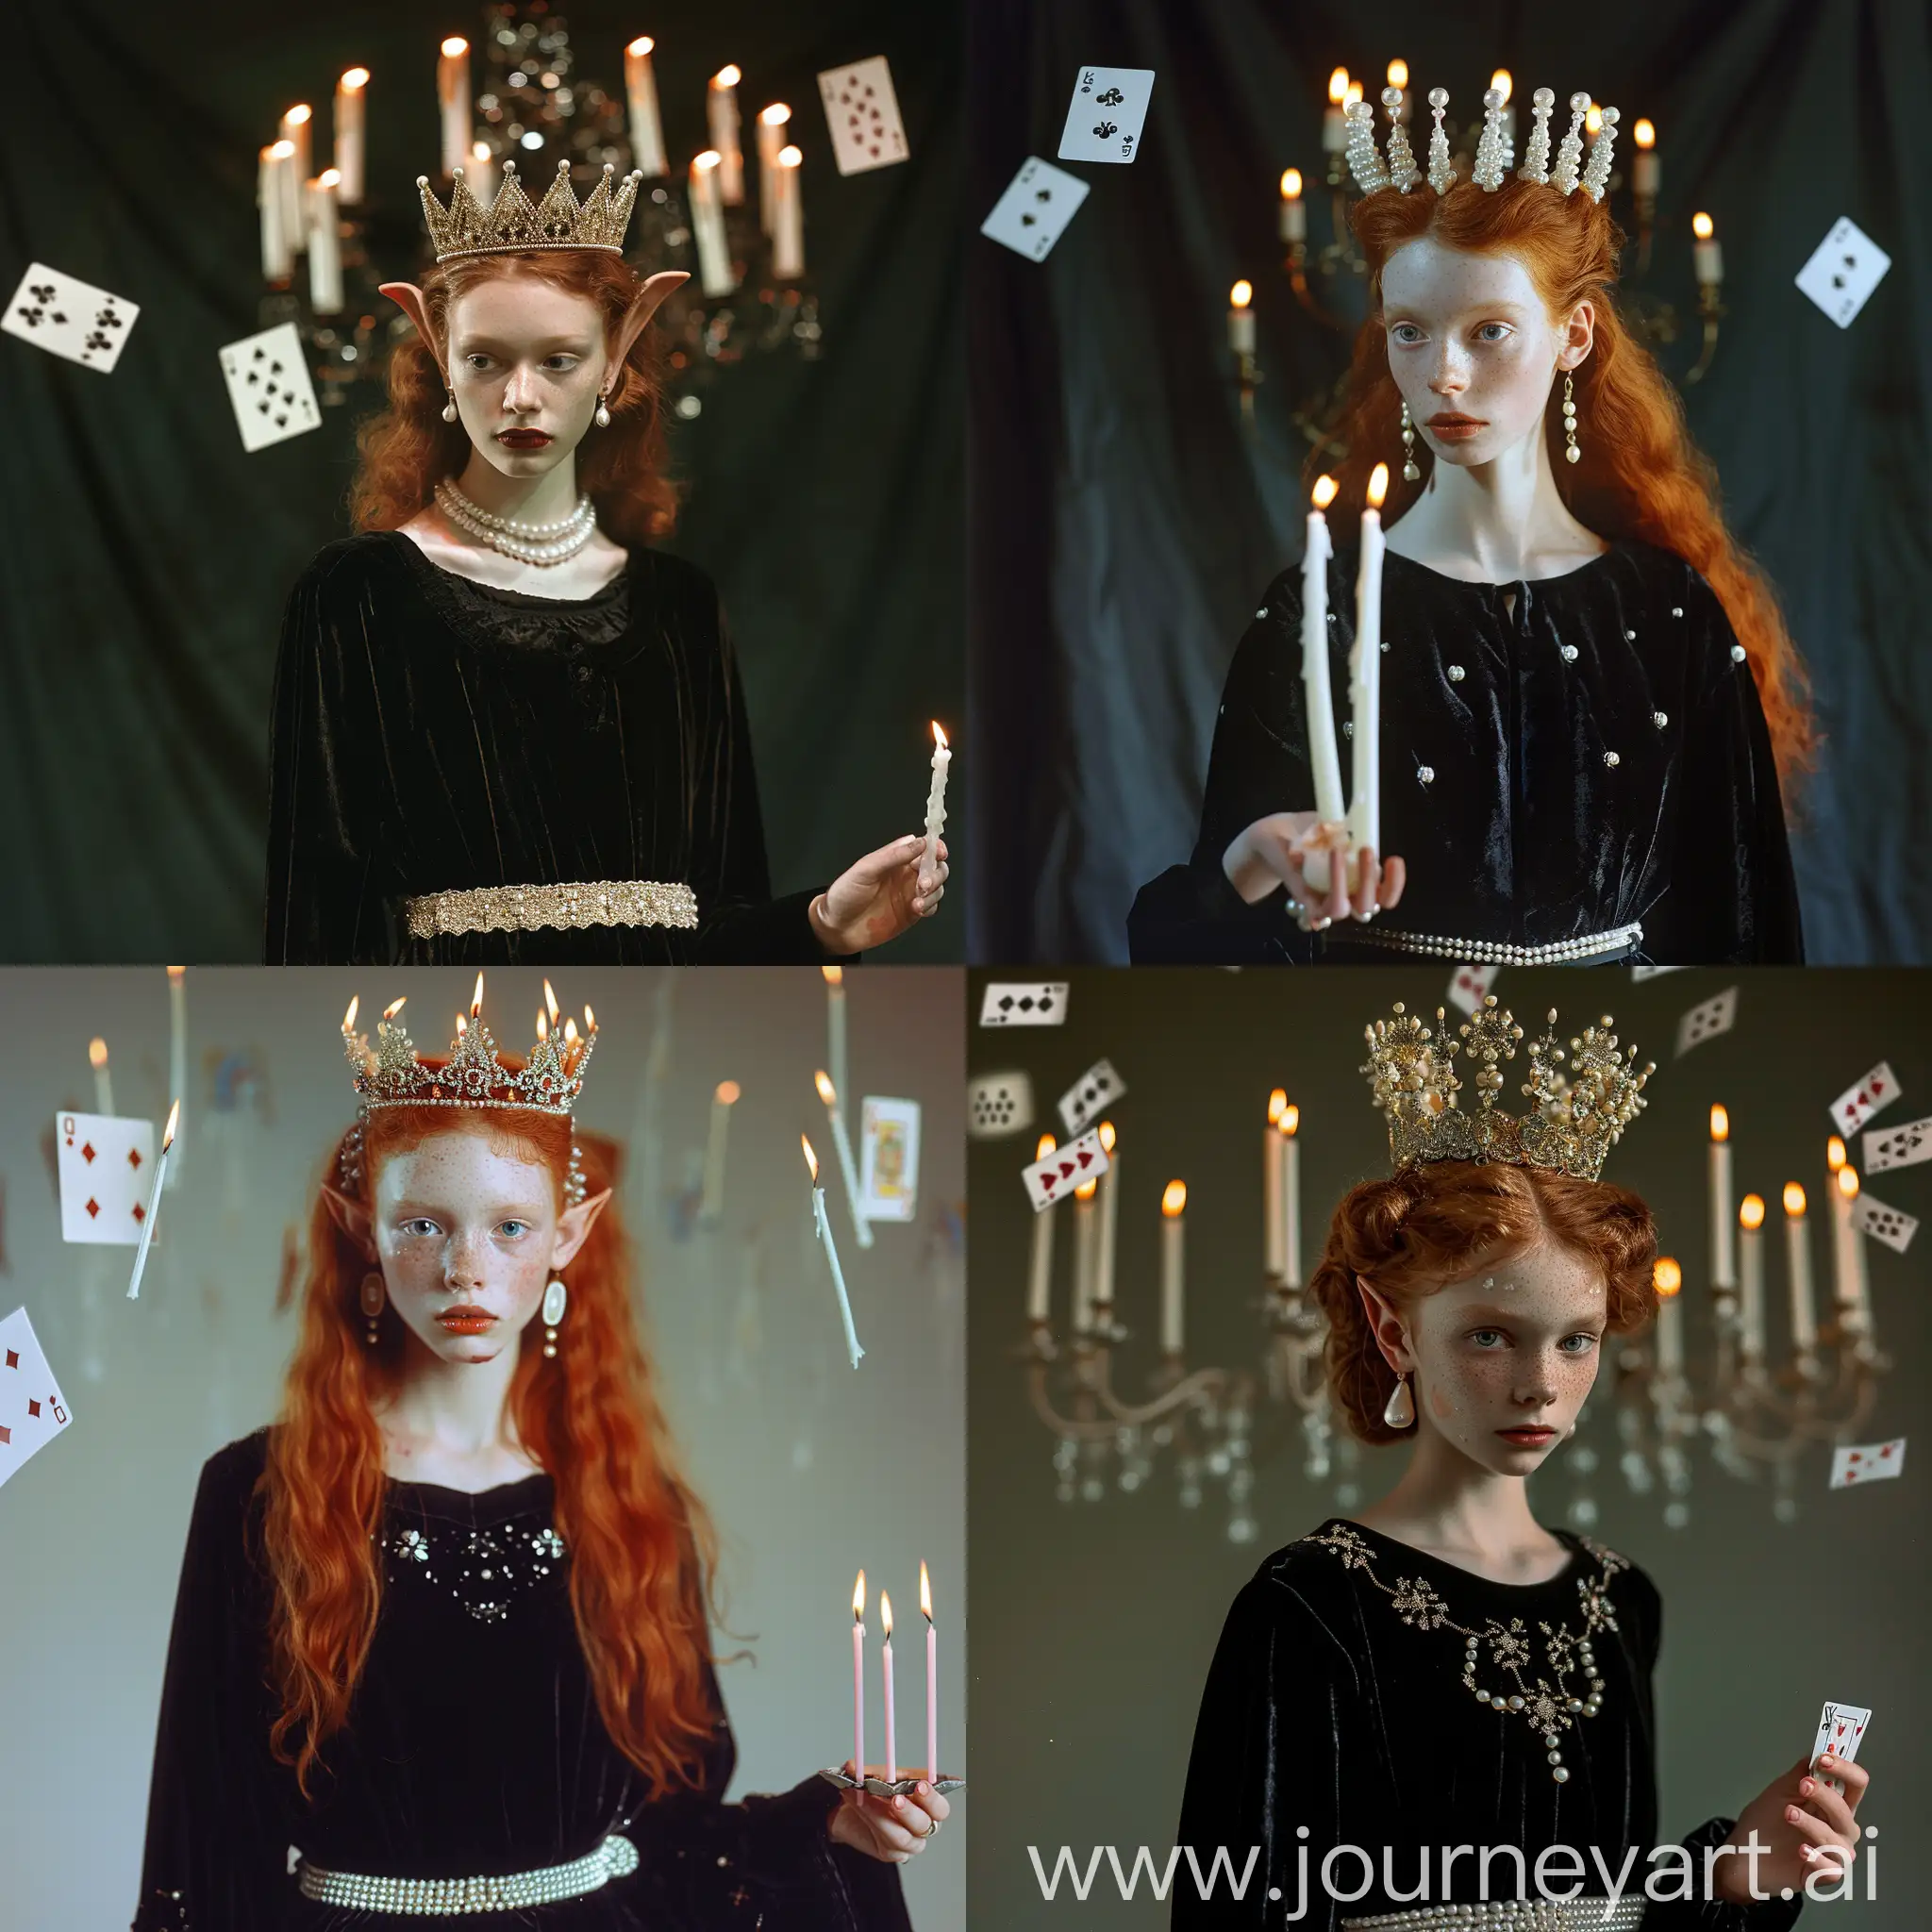 Cinematic-Vogue-Photo-RedHaired-Elf-with-Queen-of-Spades-Playing-Card-and-Candle-Crown